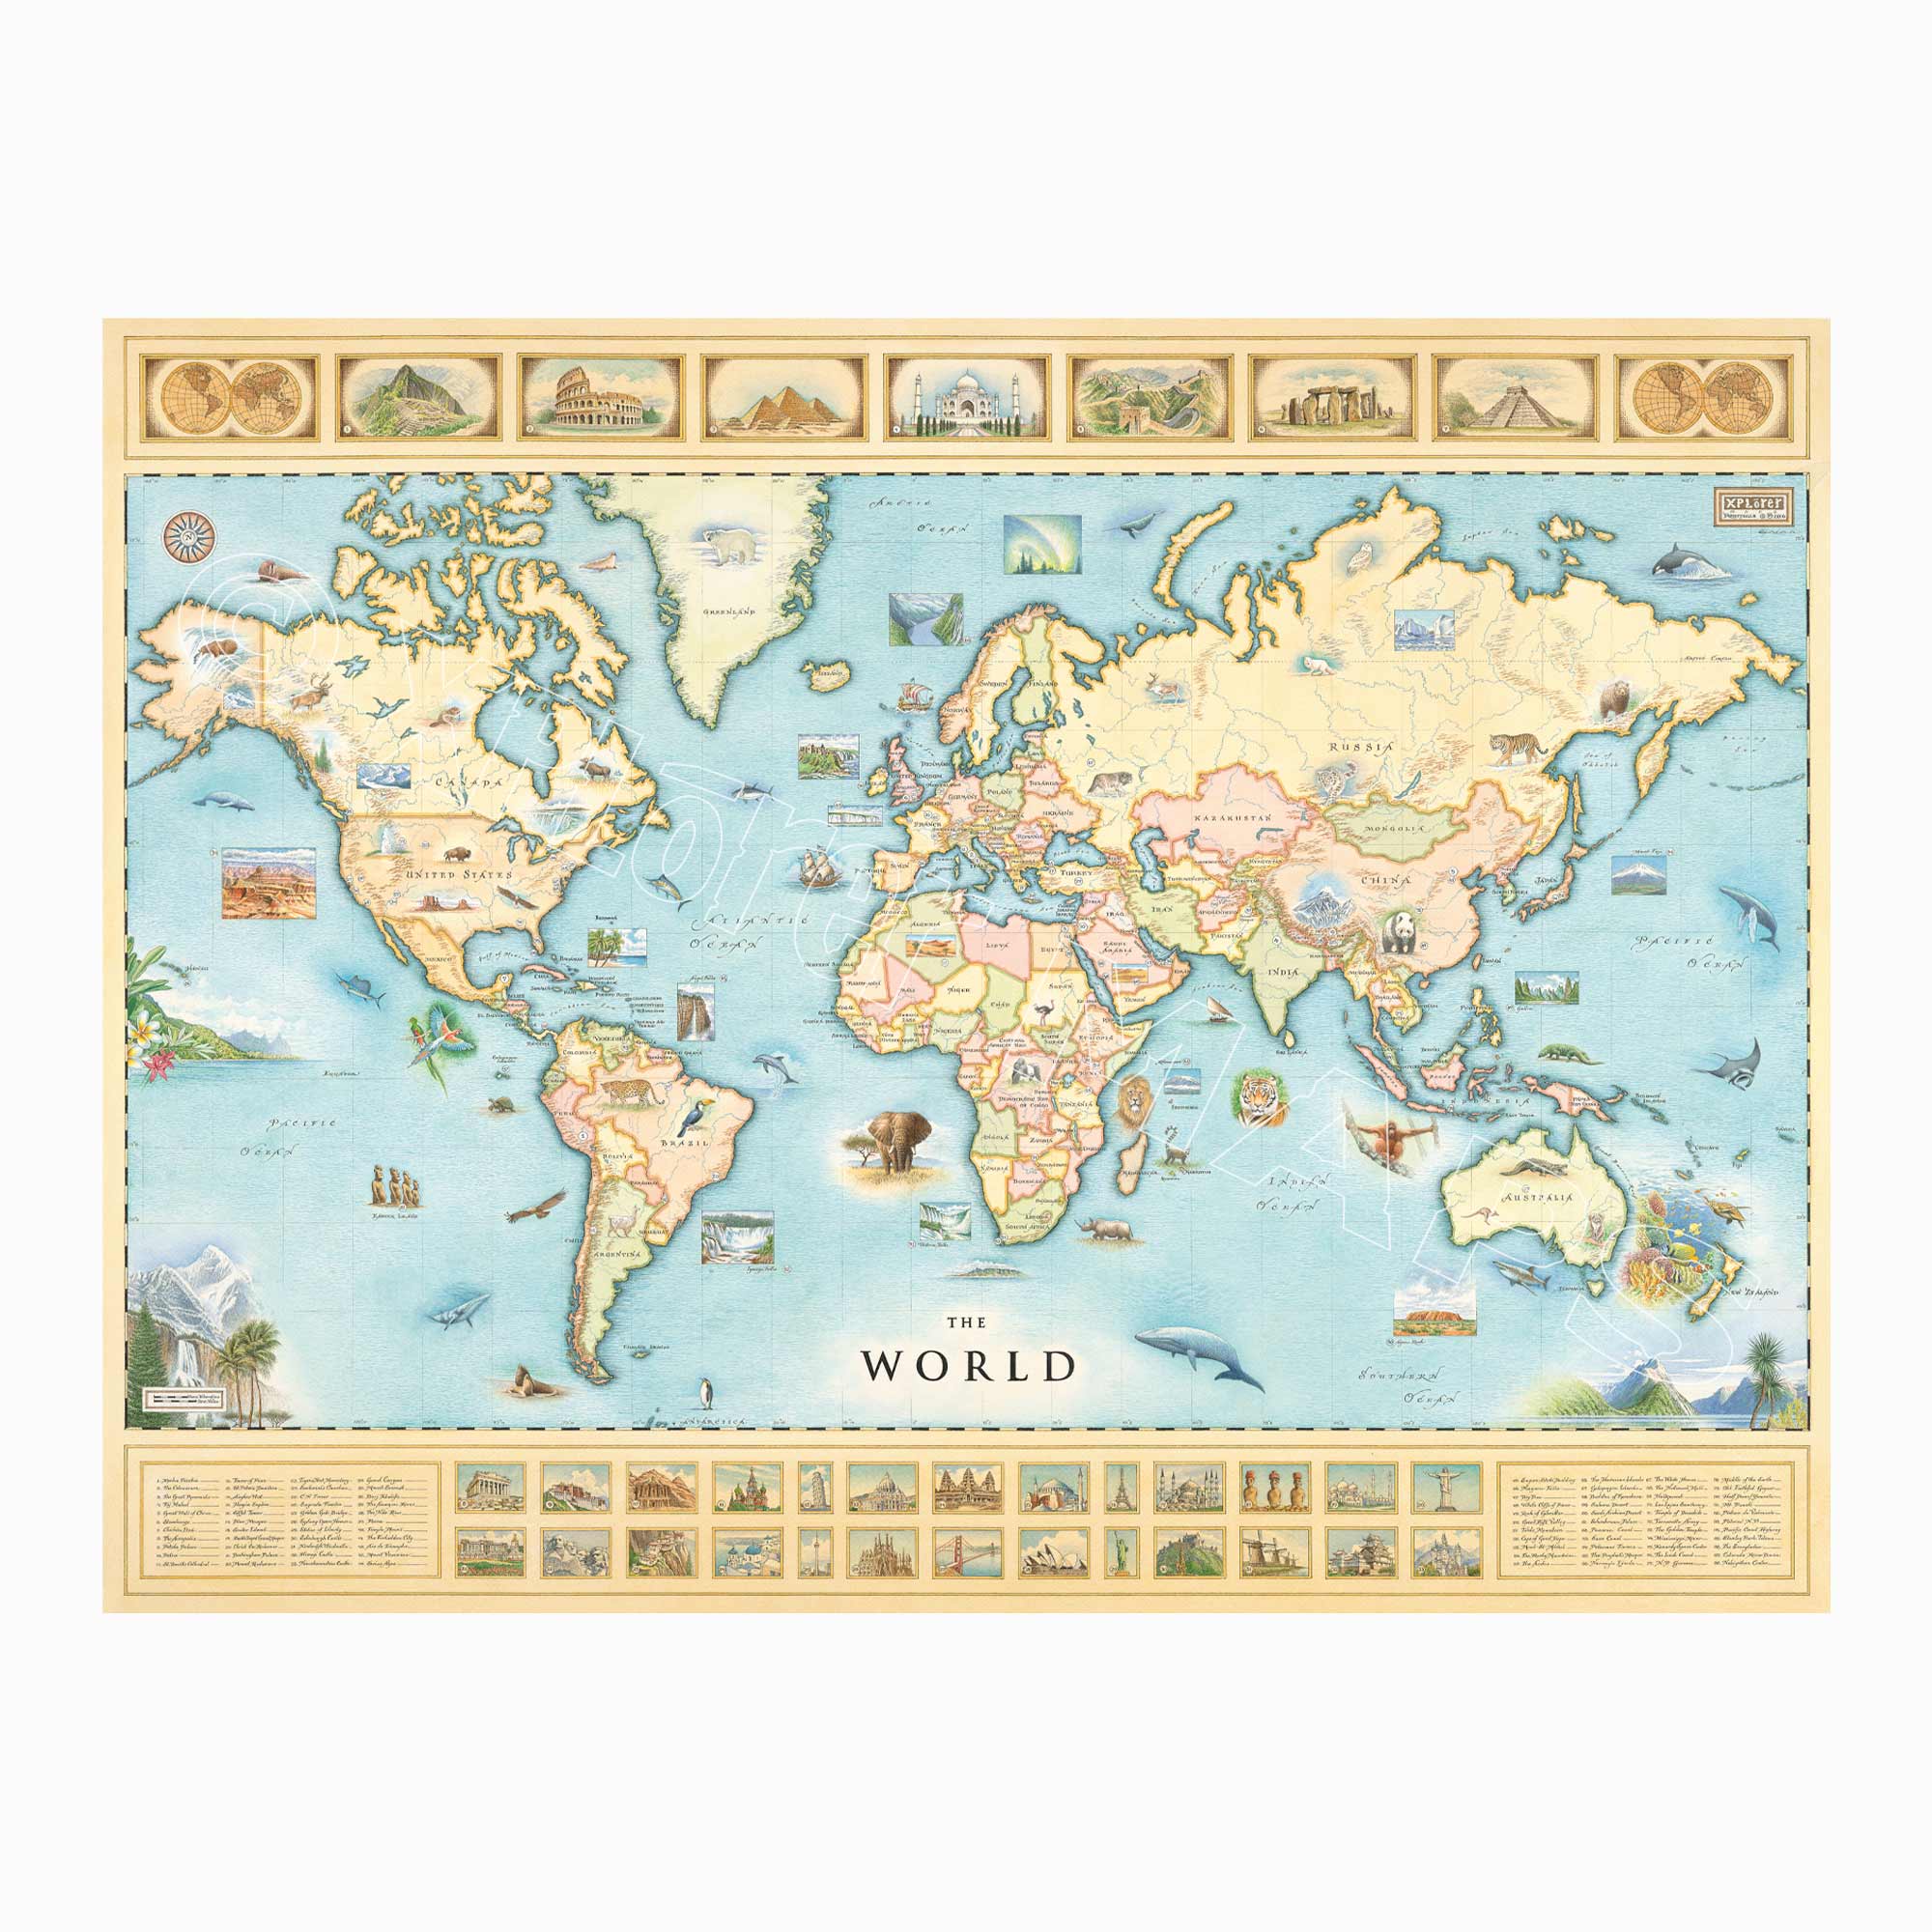 World hand-drawn map in earth tones of beige, blue, and green. The map features the entire world with illustrations of significant places and major flora and fauna. Some places include Machu Pichu, the Eiffel tower, Mount Everest, and Easter Island. Measures 32x24.